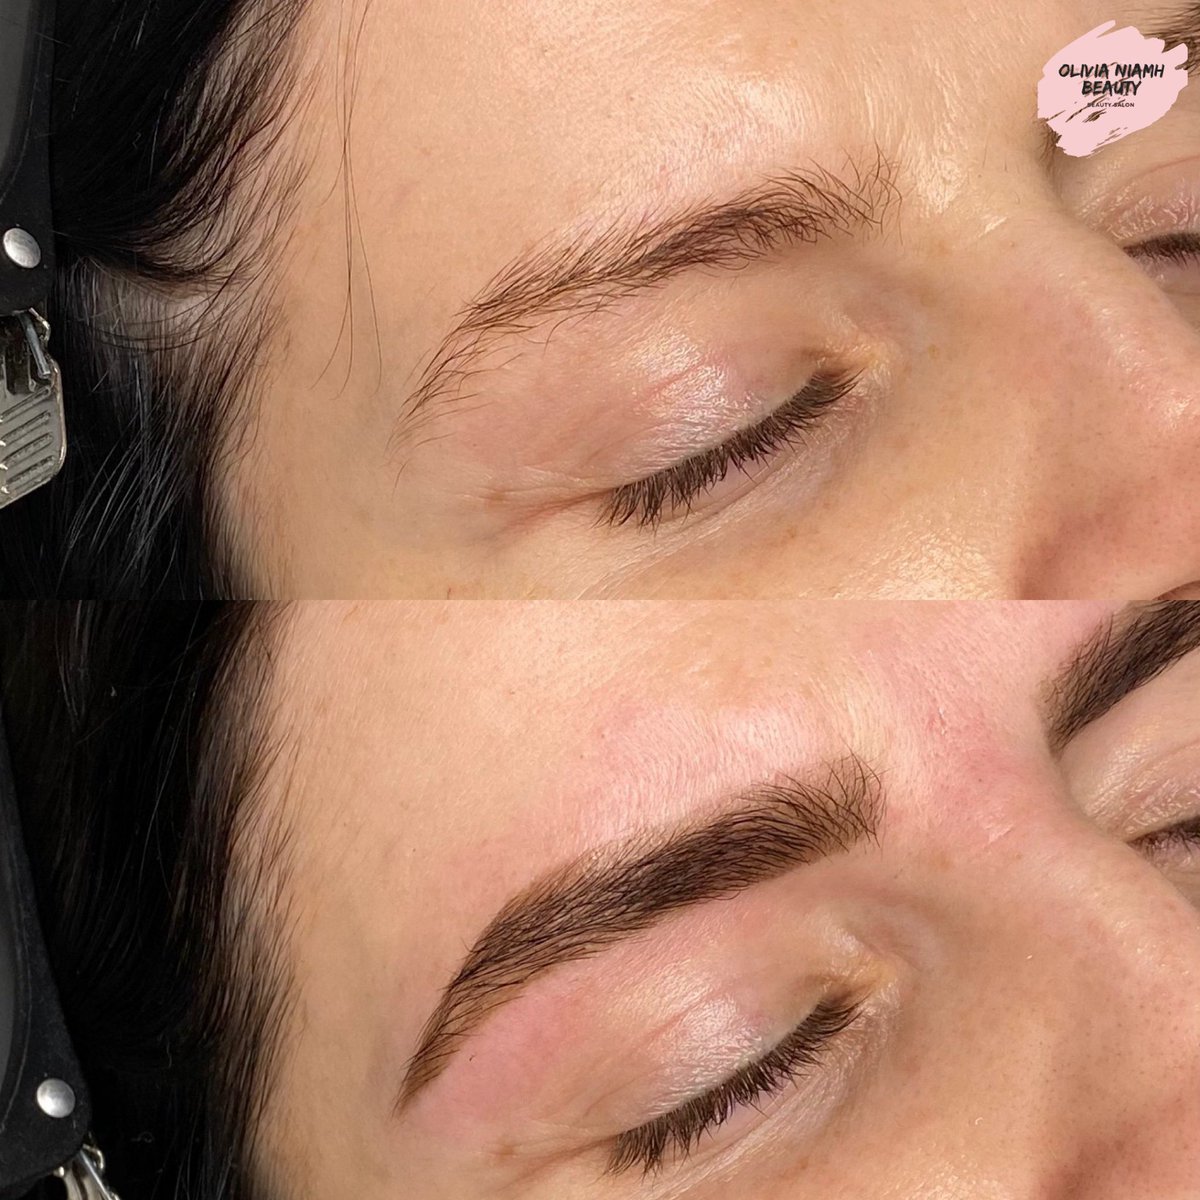 BROWS TO DIE FOR 😻😫

#brows #dycoticshenna #dycoticshennabrows #hennabrows #henna #northampton #beauty #northamptonbusinesses #northamptonbusiness